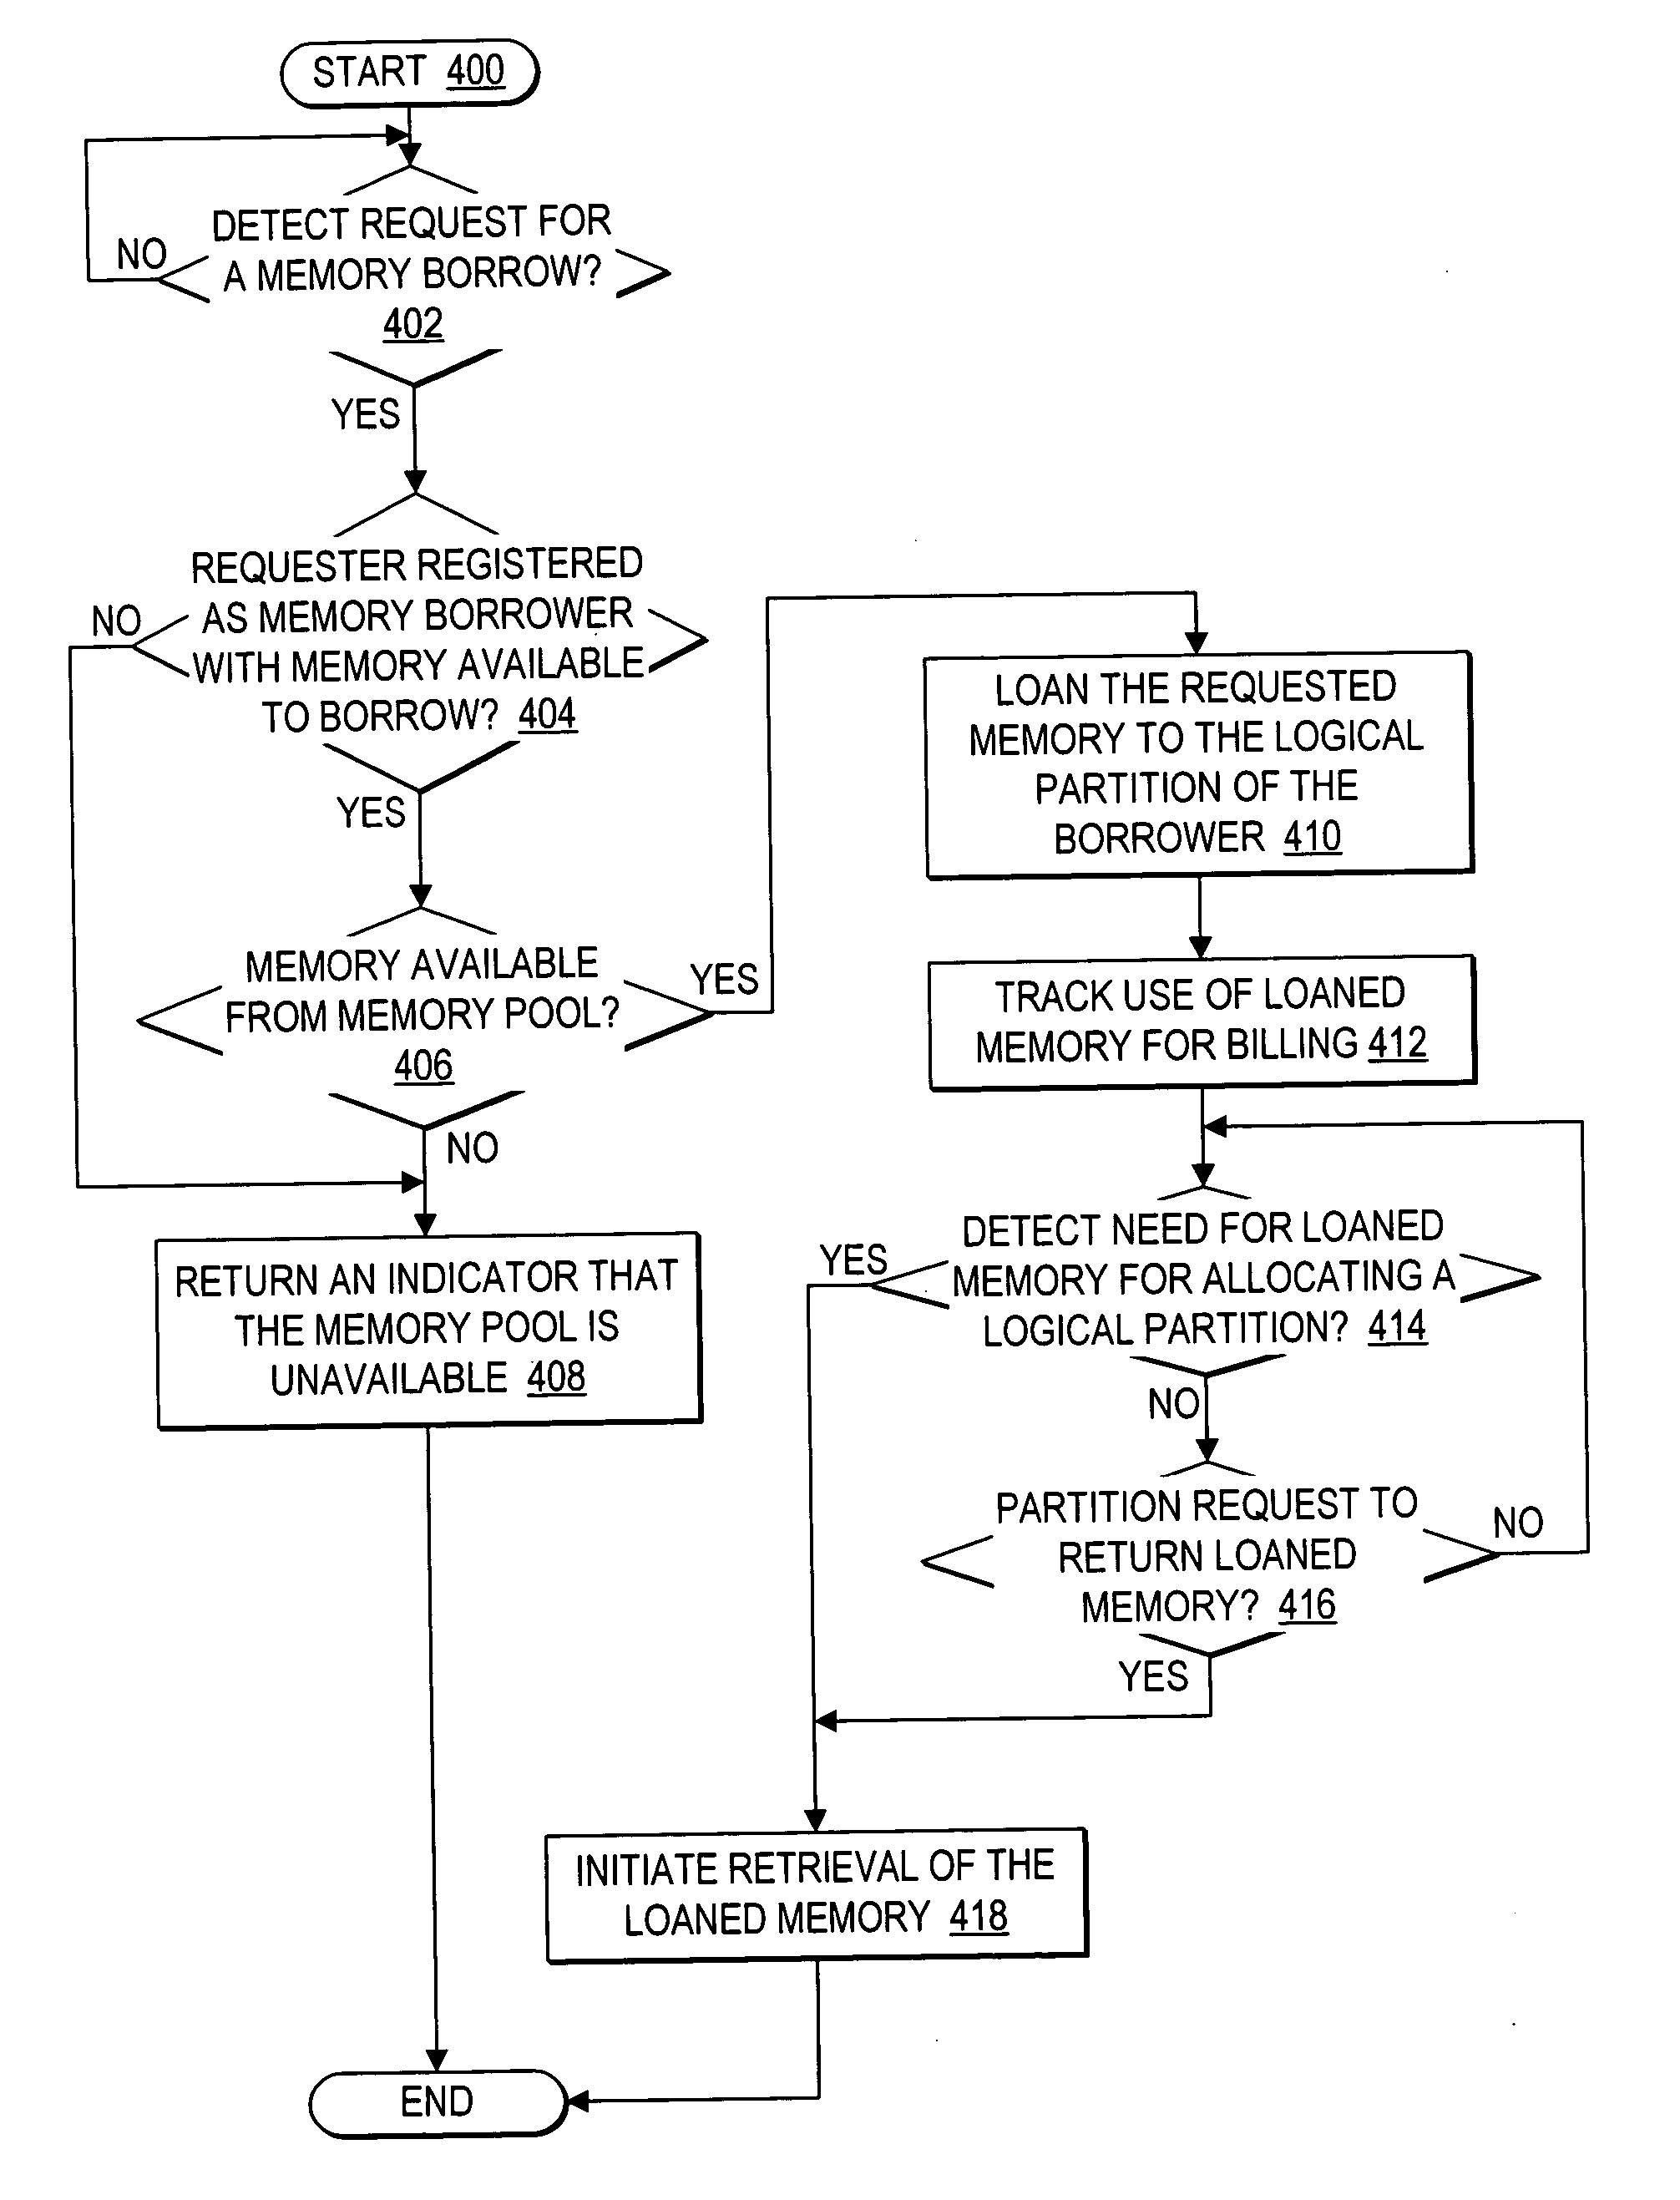 Dynamic memory management of unallocated memory in a logical partitioned data processing system